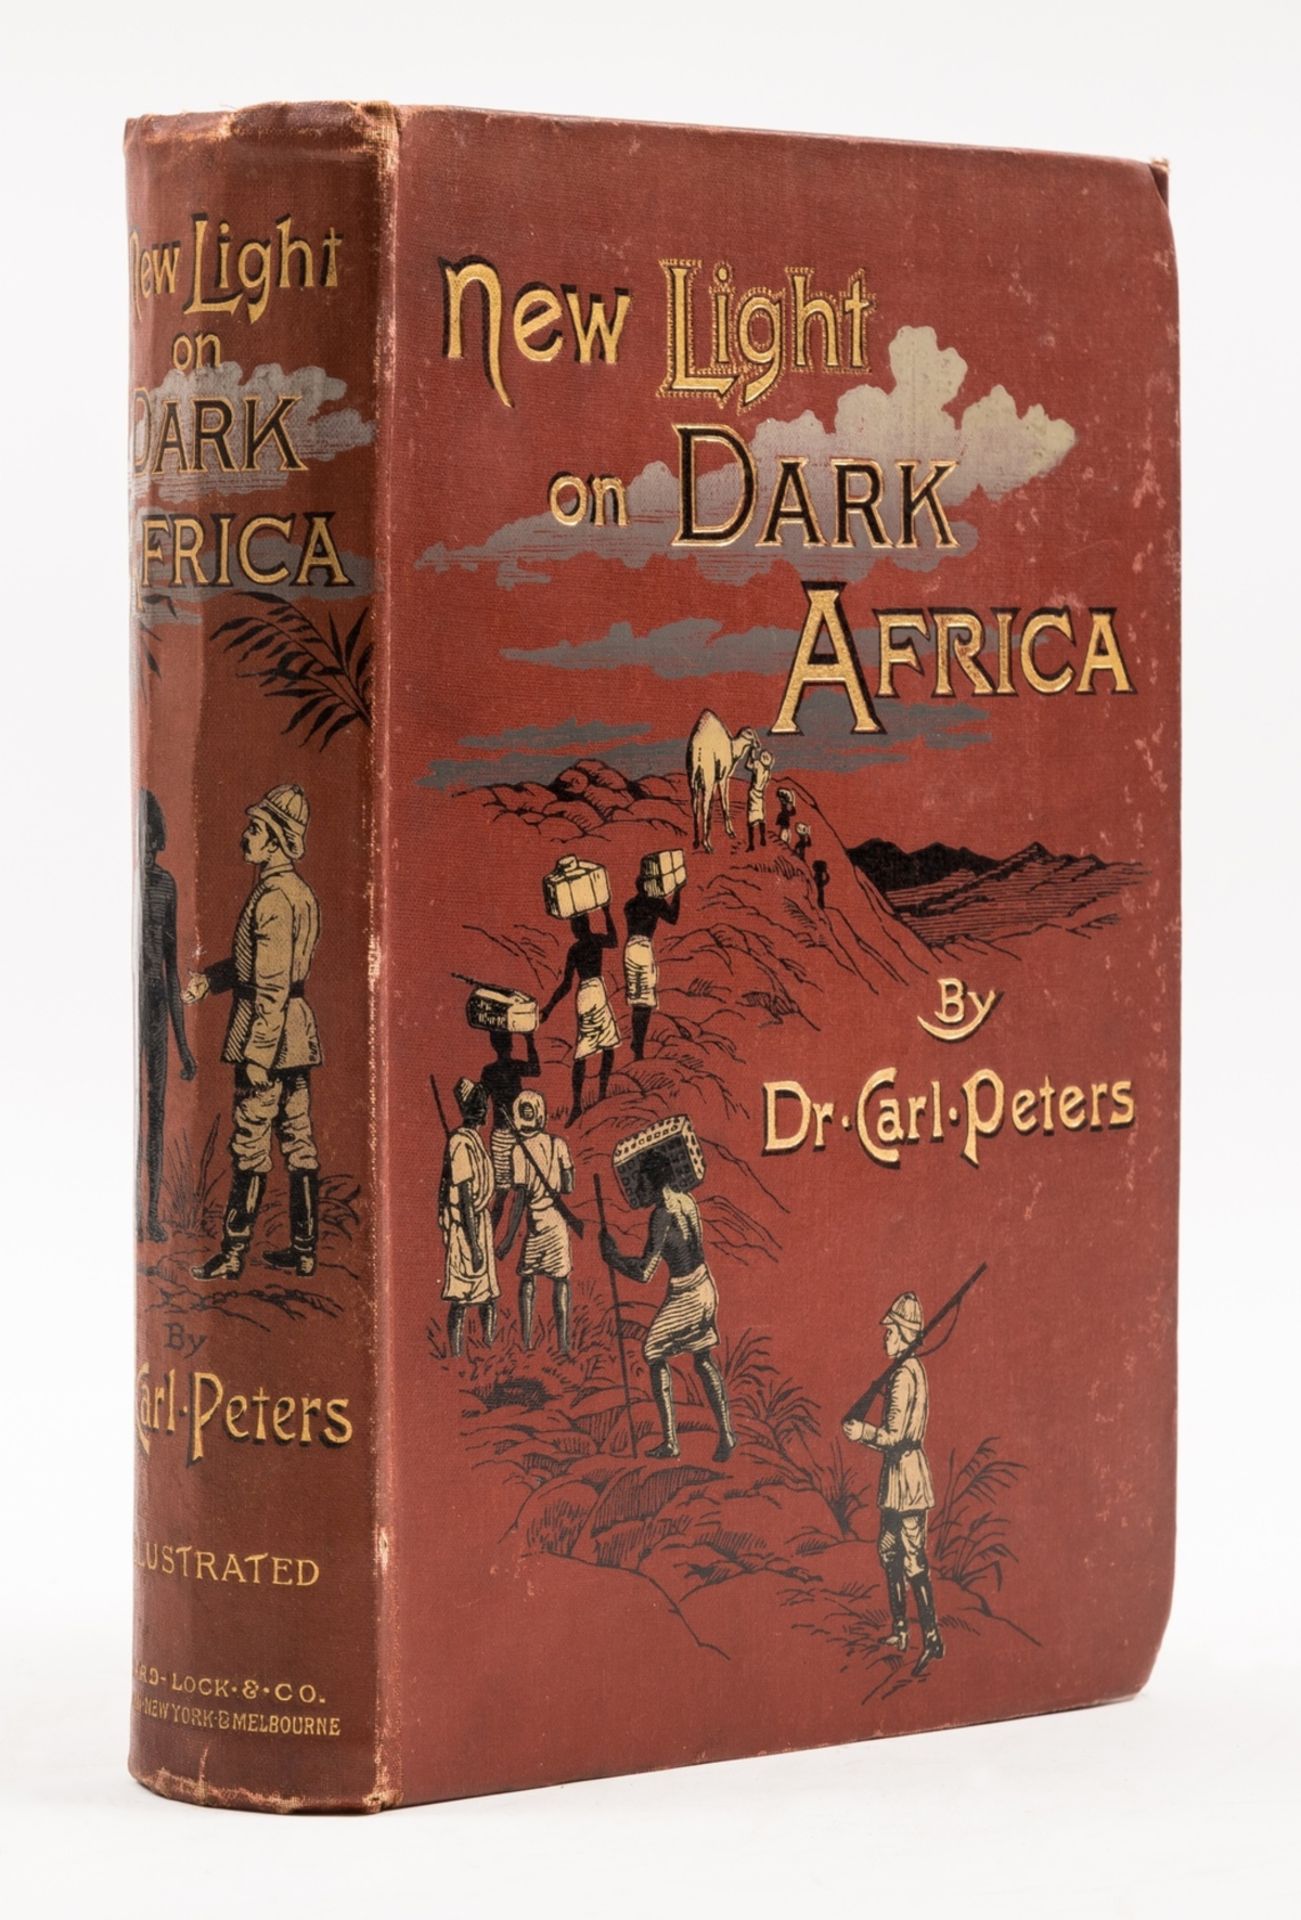 Africa.- Peters (Dr Carl) New Light on Dark Africa, first edition, 1891.